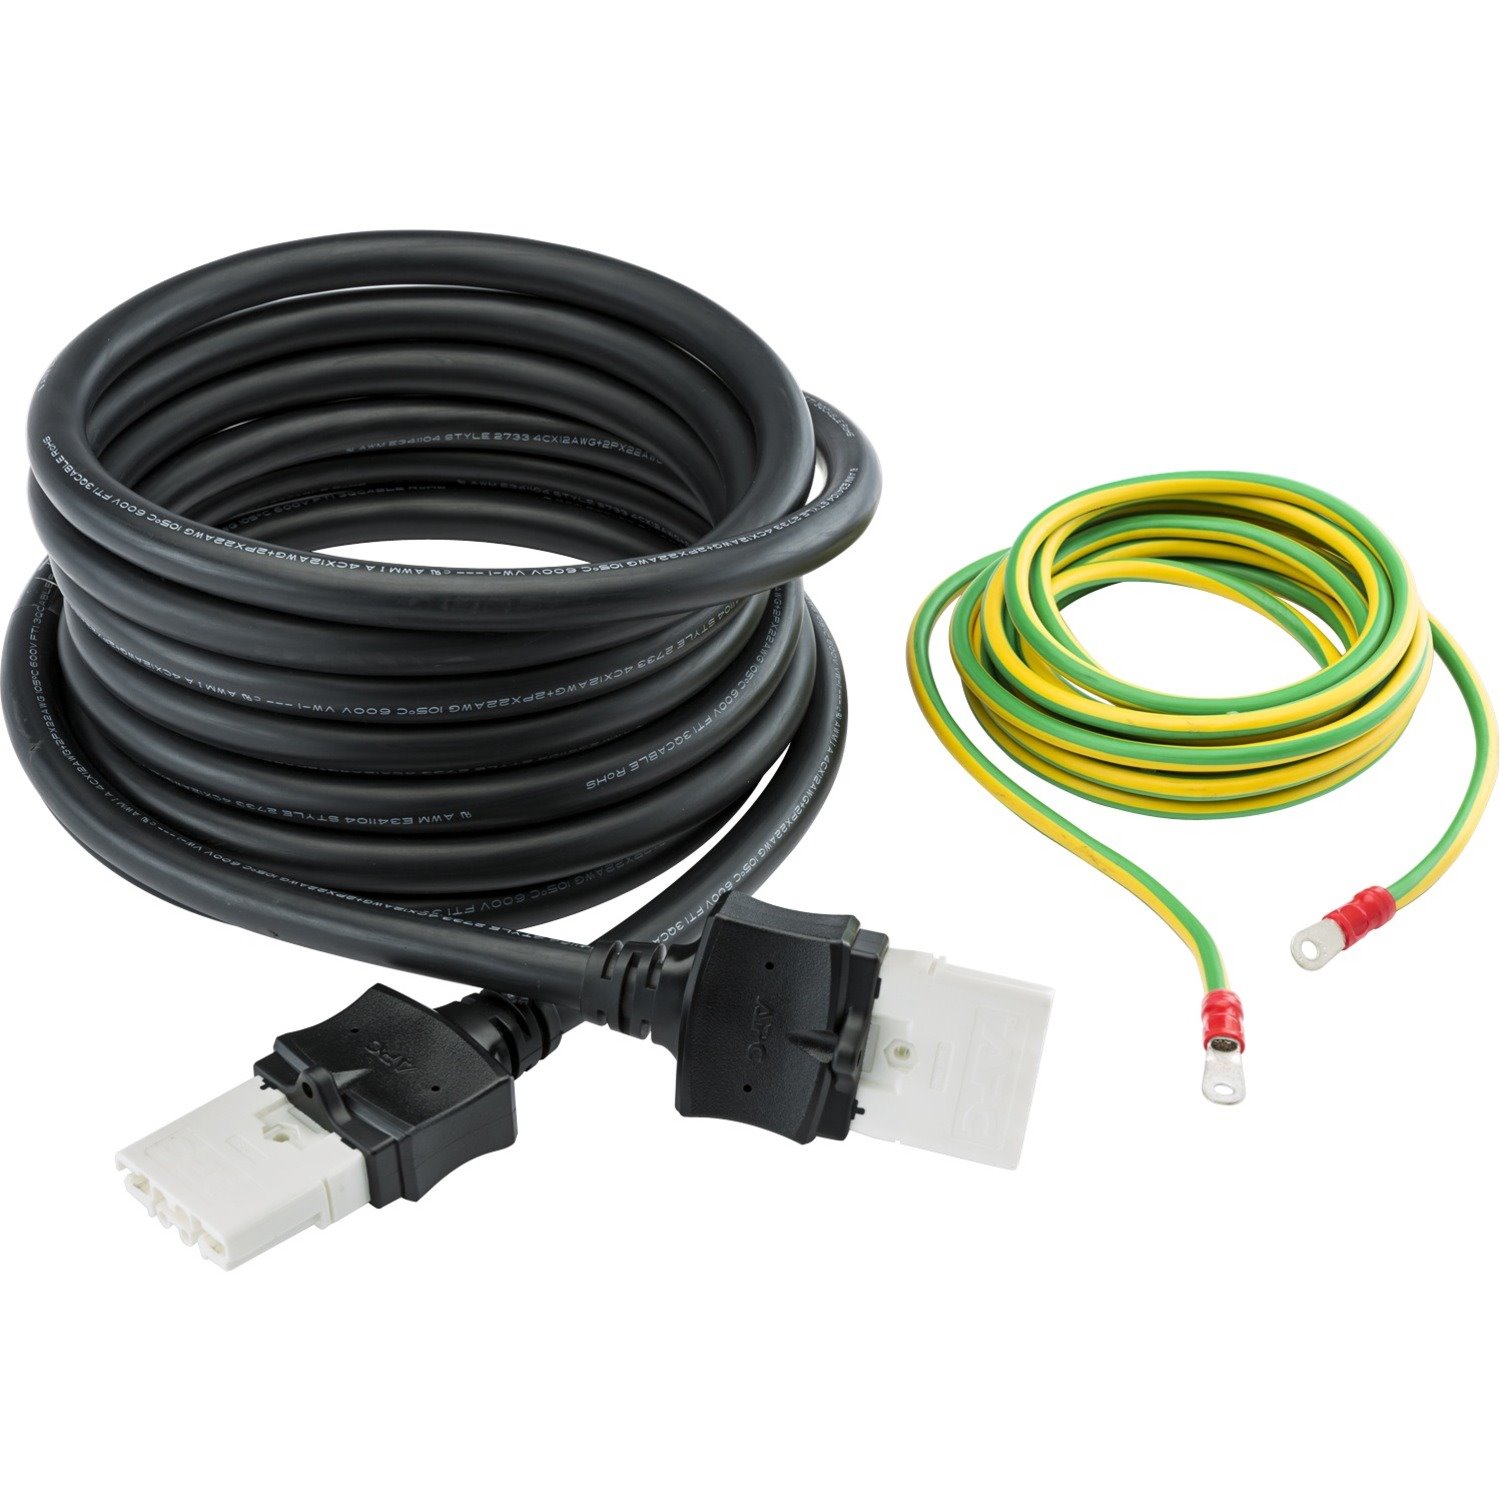 APC by Schneider Electric Power Extension Cord